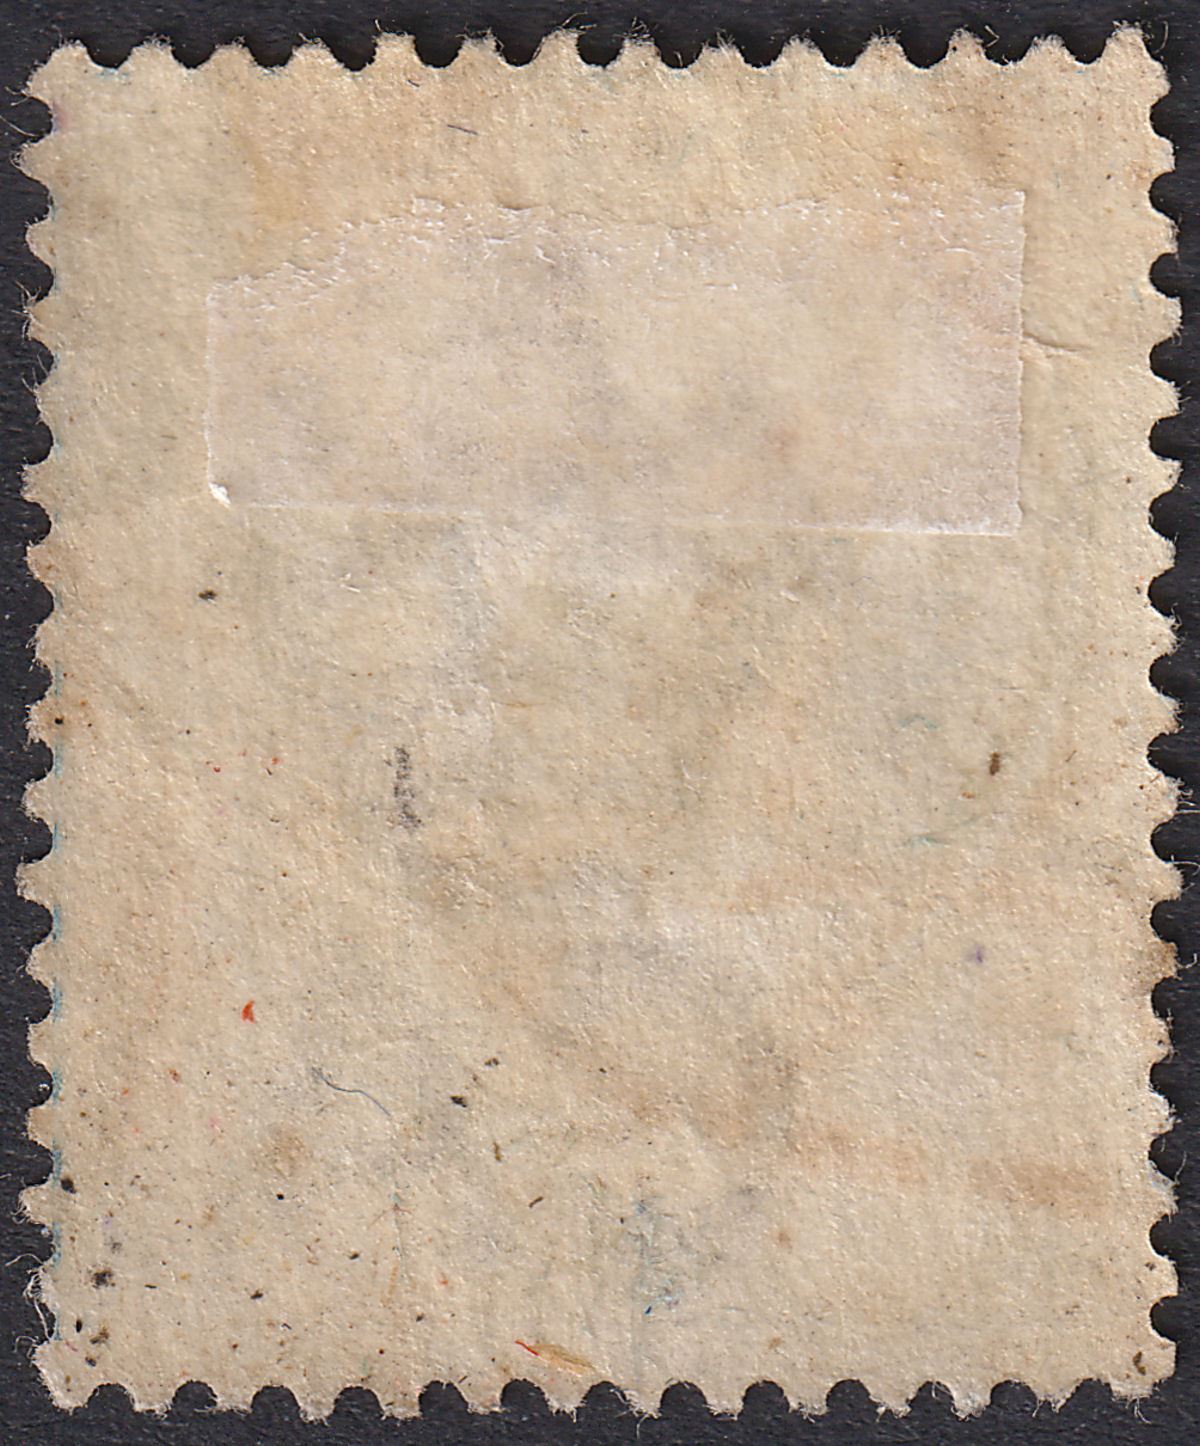 Hong Kong 1902 QV 12c Blue Used with AMOY code A Postmark SG Z54 cat £225